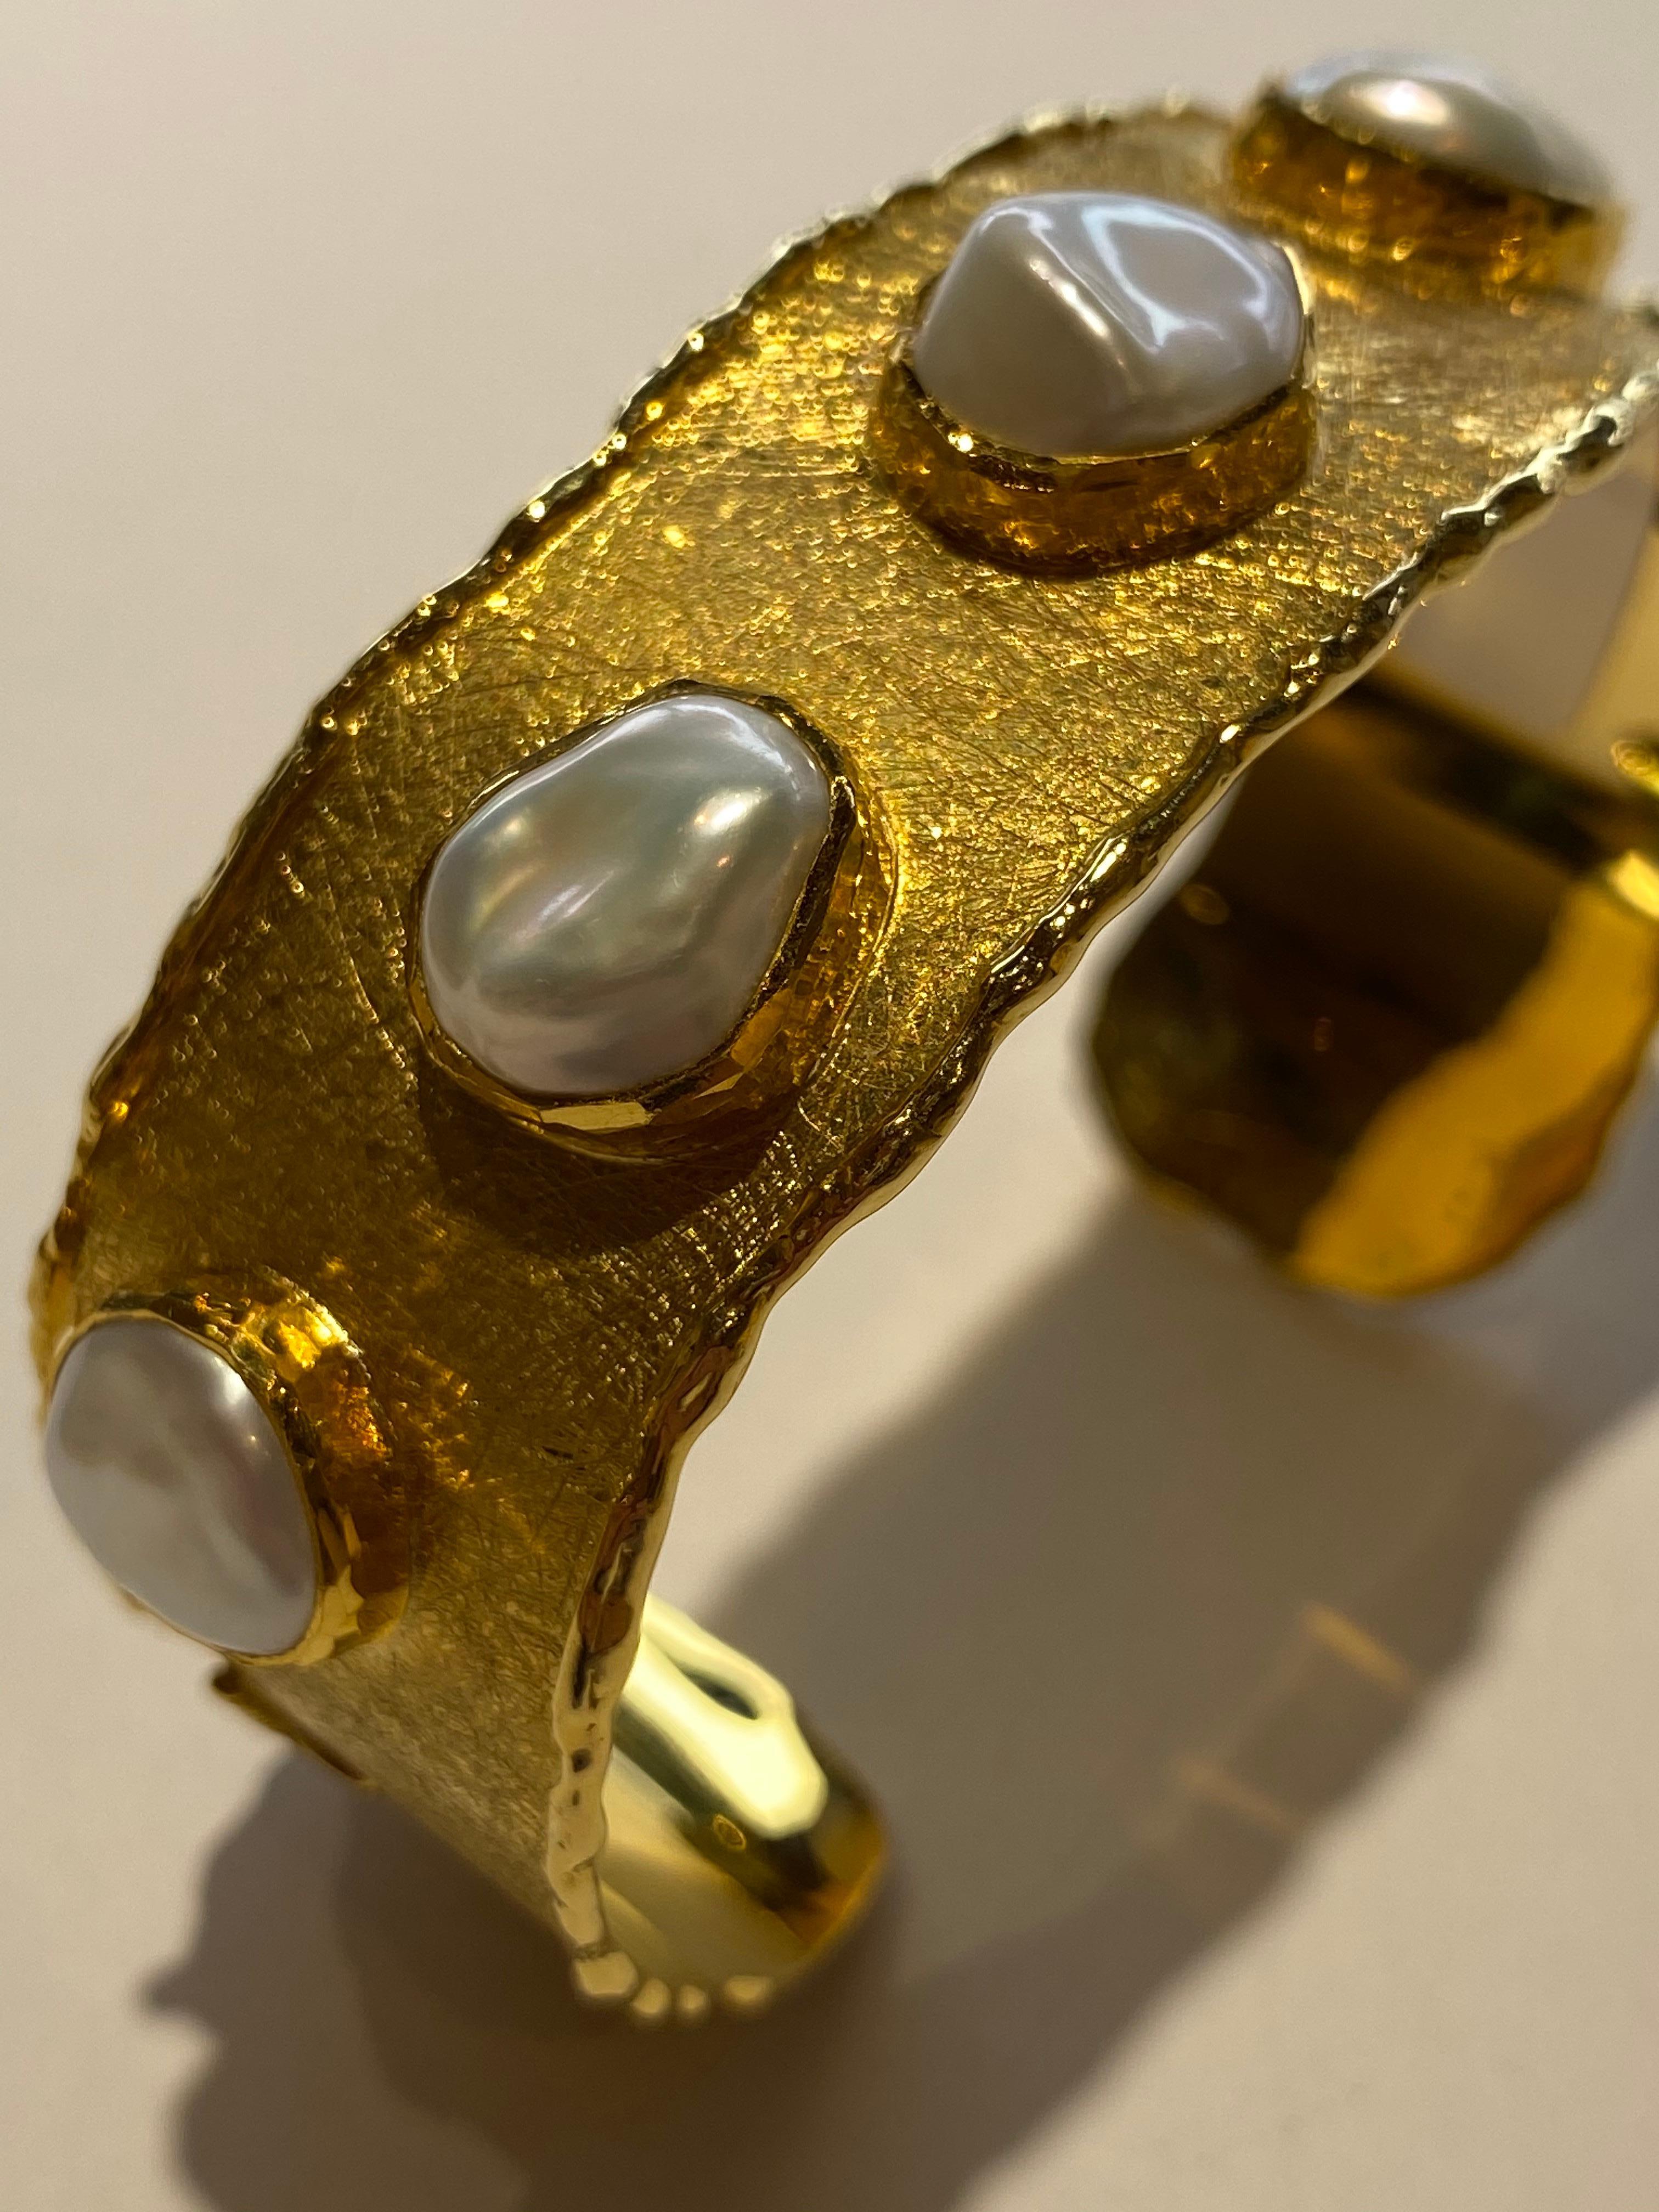 Inspired by the energy pulsating throughout nature, Velyan unites pure metals and gemstones into stunning styles that display the grandeur of fine jewelry. 

This cuff style bracelet features pearls set in 24k/18k yellow gold.

Details:

Pearls

24K